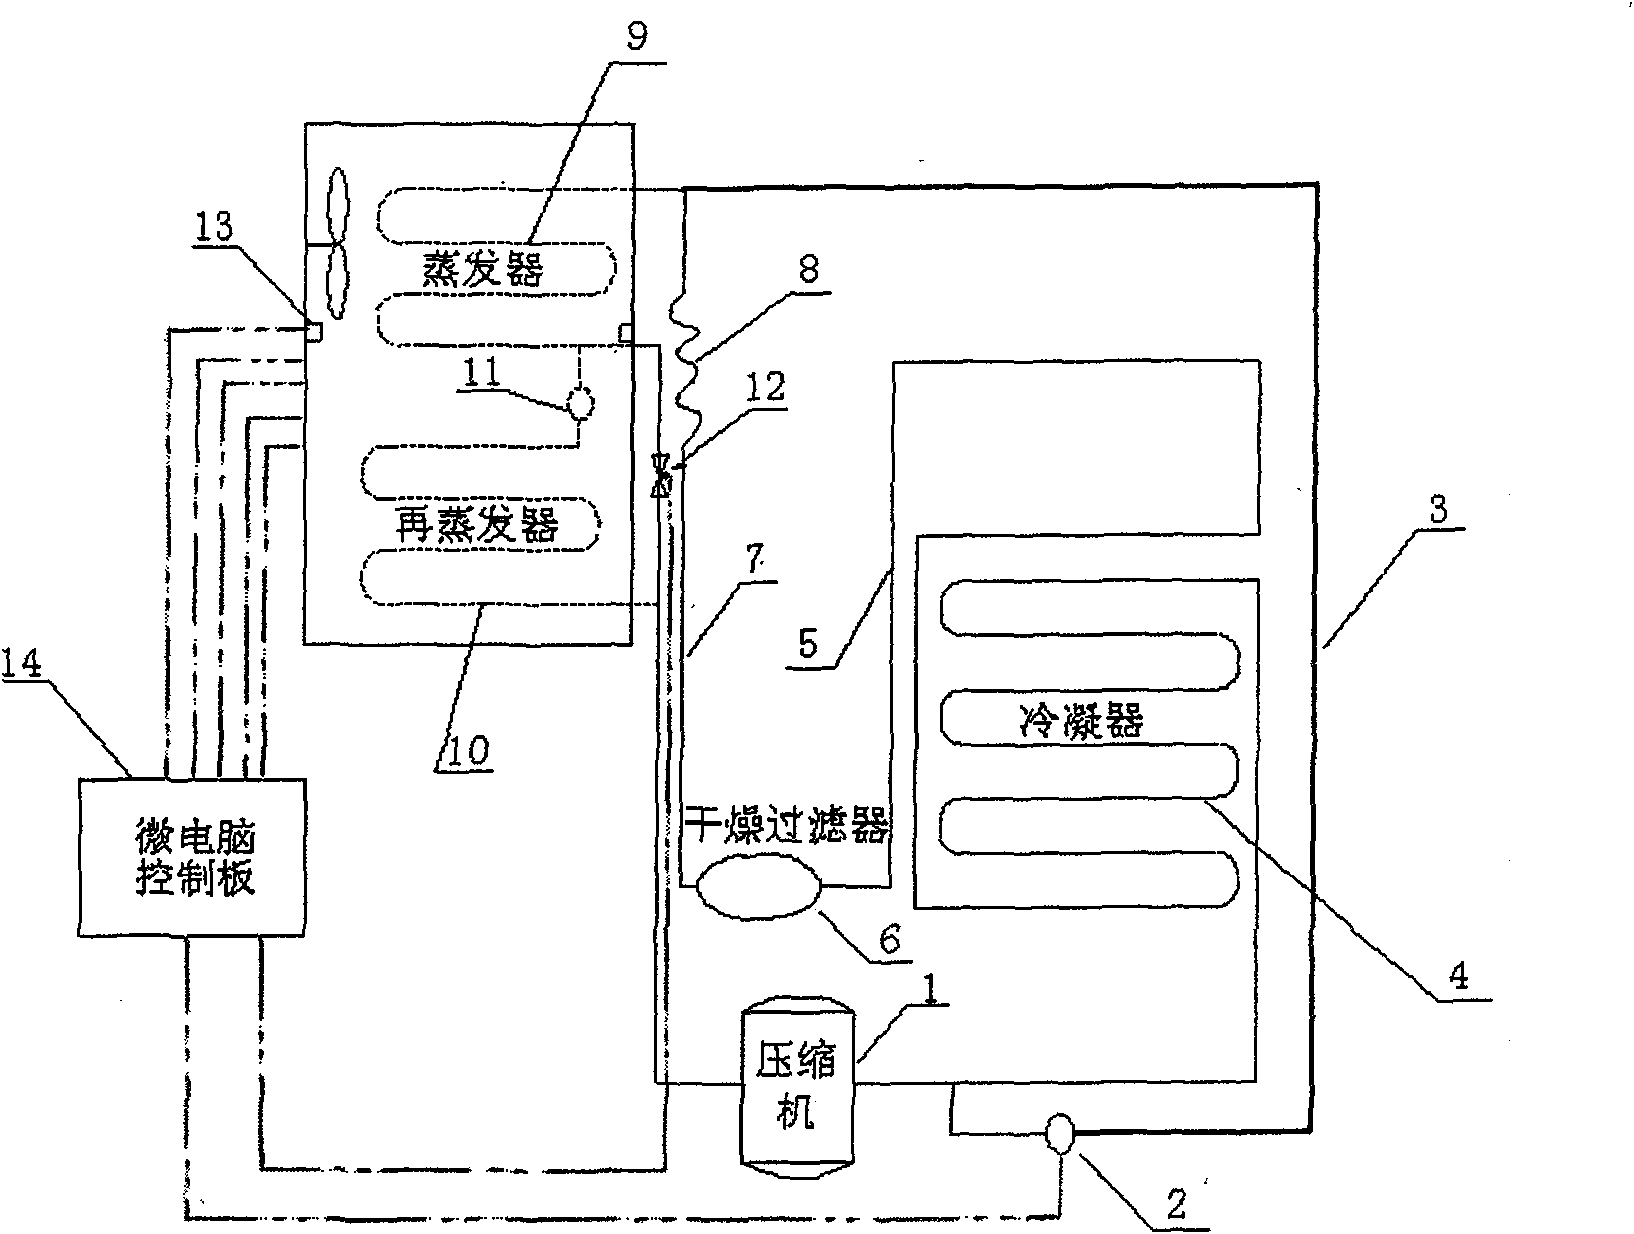 Photoelectric sensing hot gas bypass defrosting refrigerator and working method